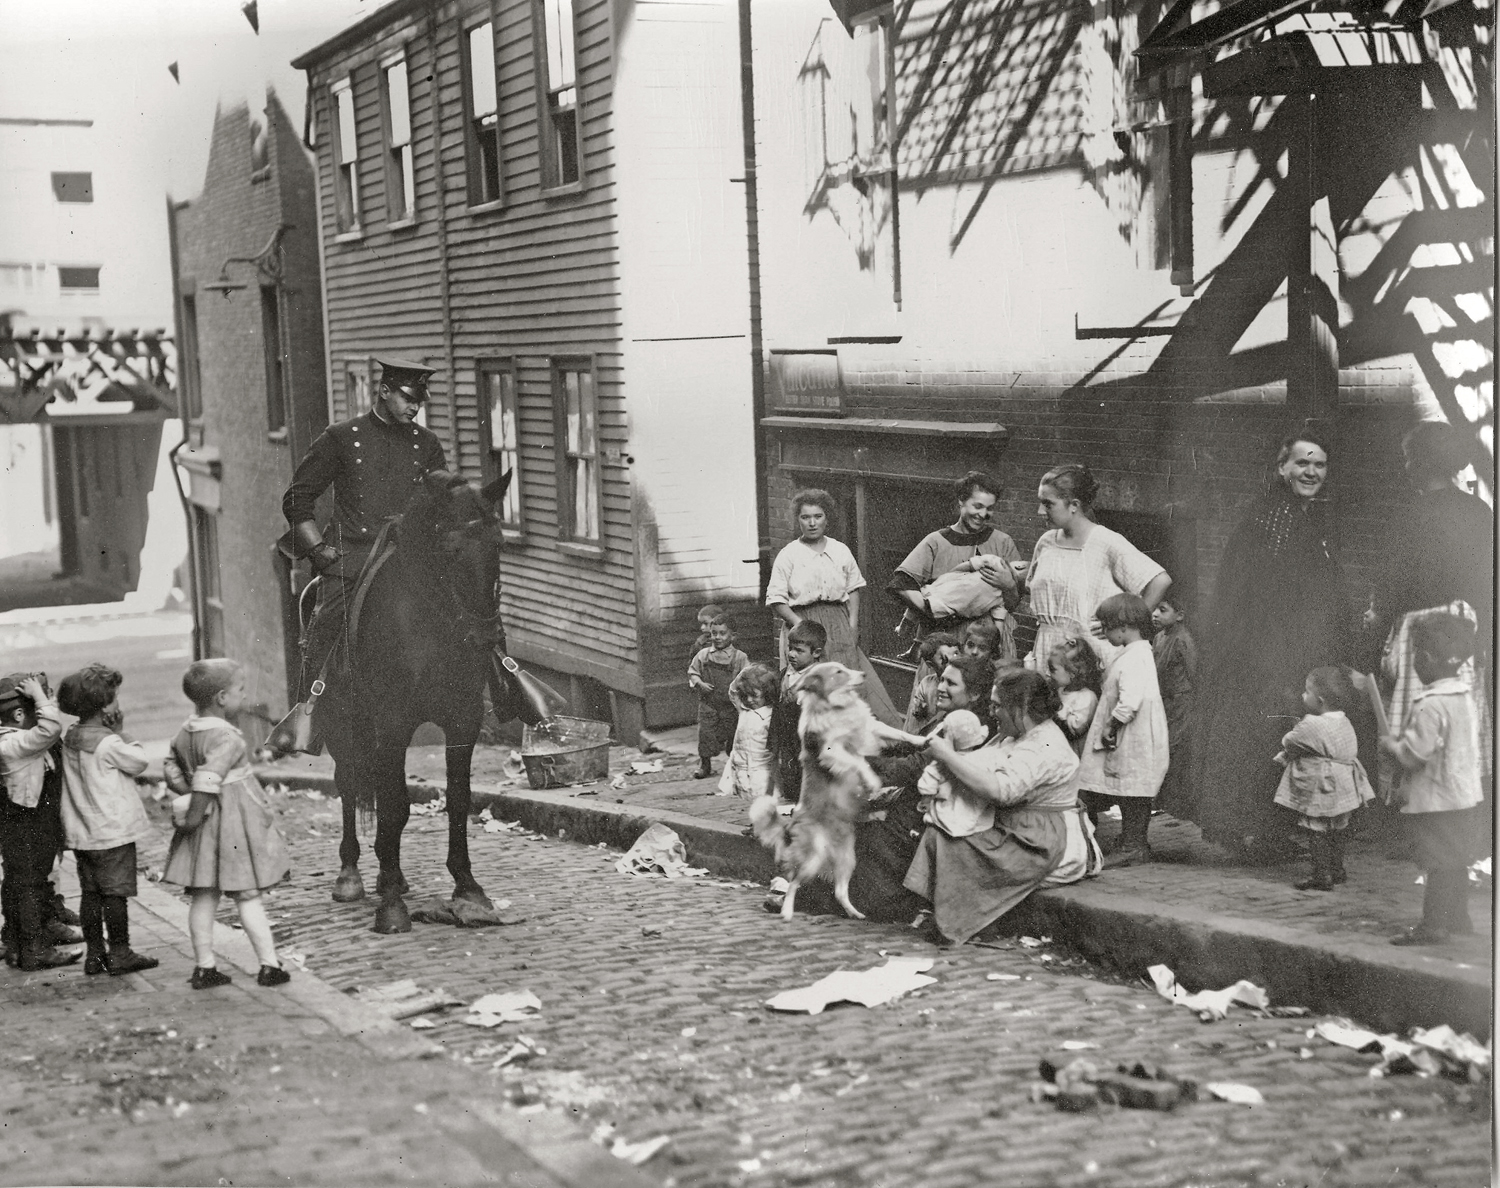 My sister acquired this photo while attending Tufts in the '80s. The photographer was unnamed and the only label said: Boston, 1913. View full size.